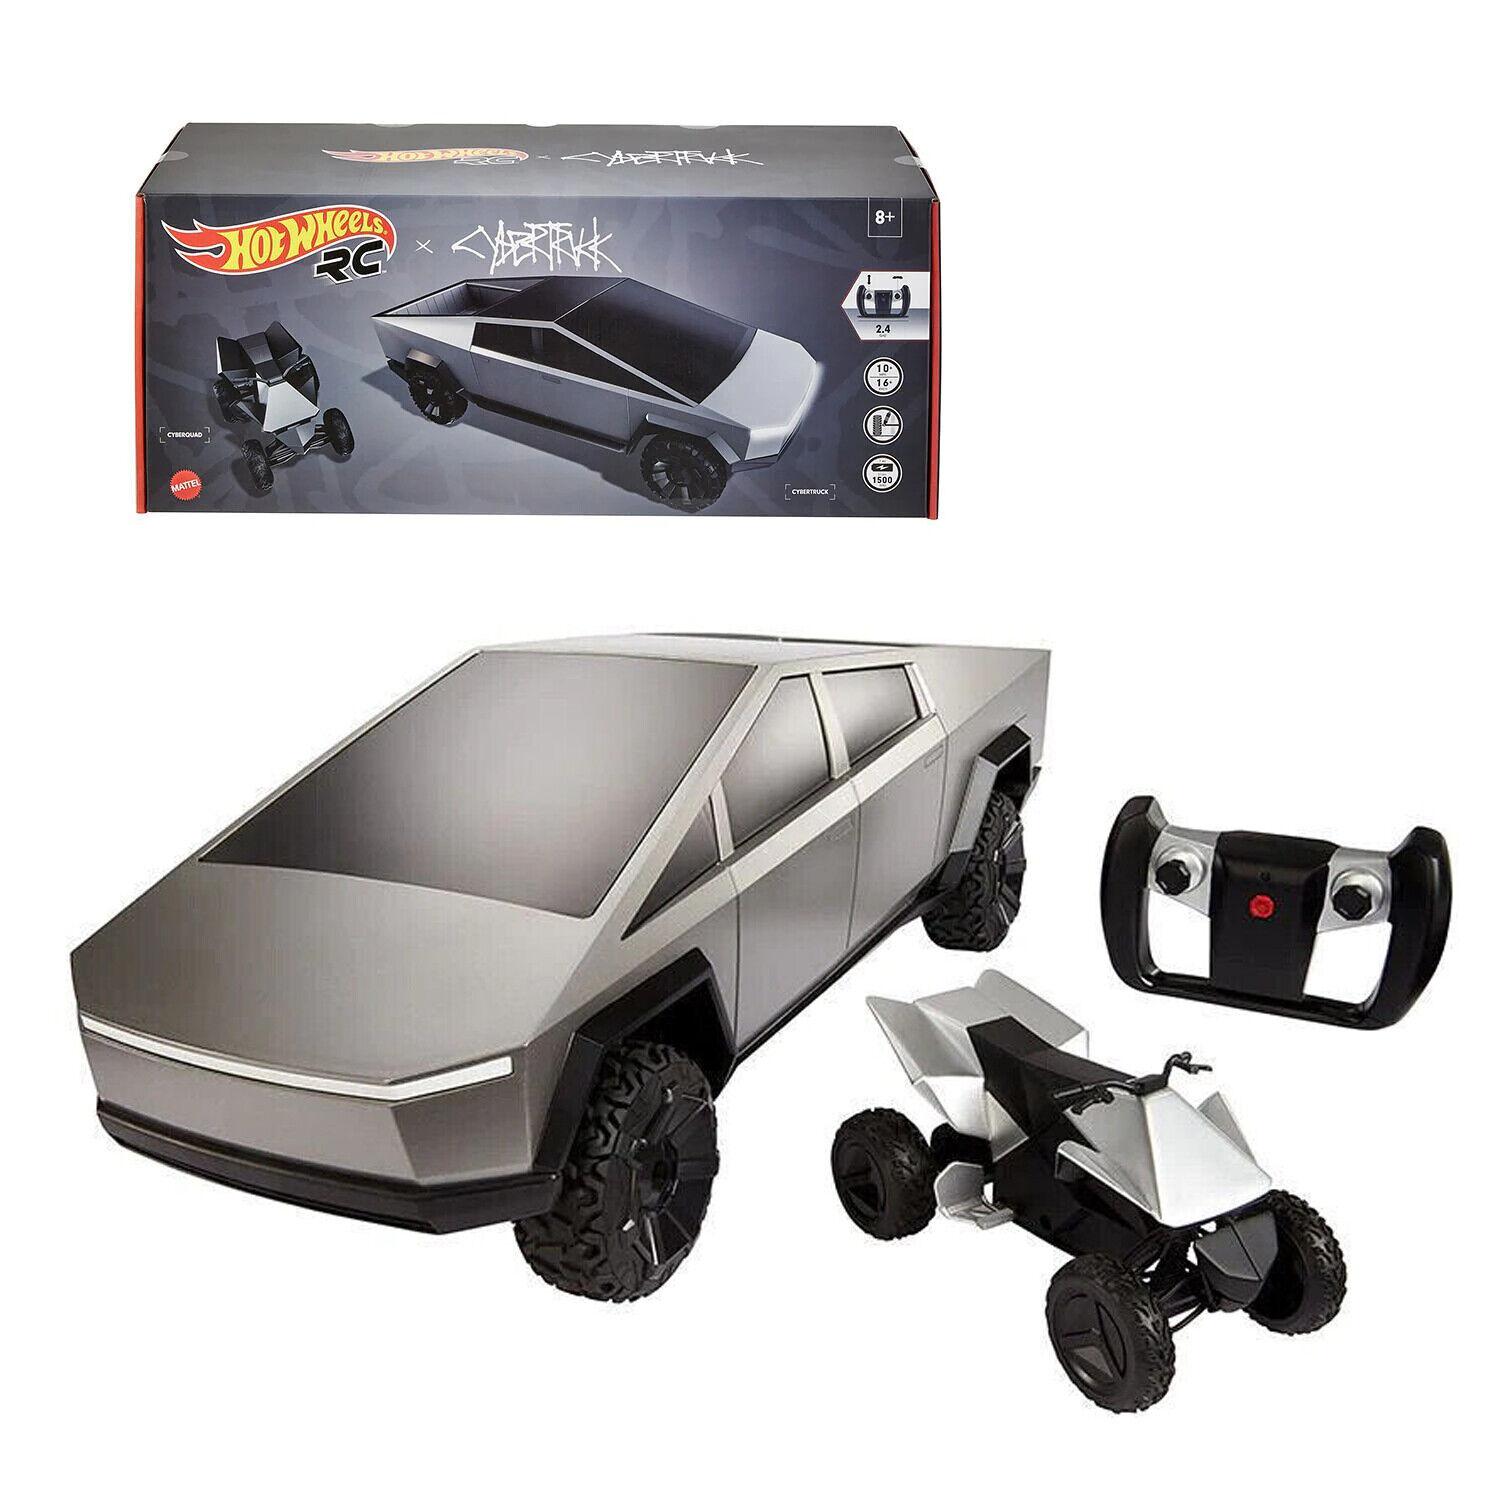 Tesla Rc Car: Tesla RC Cars: Models, Features, and Prices